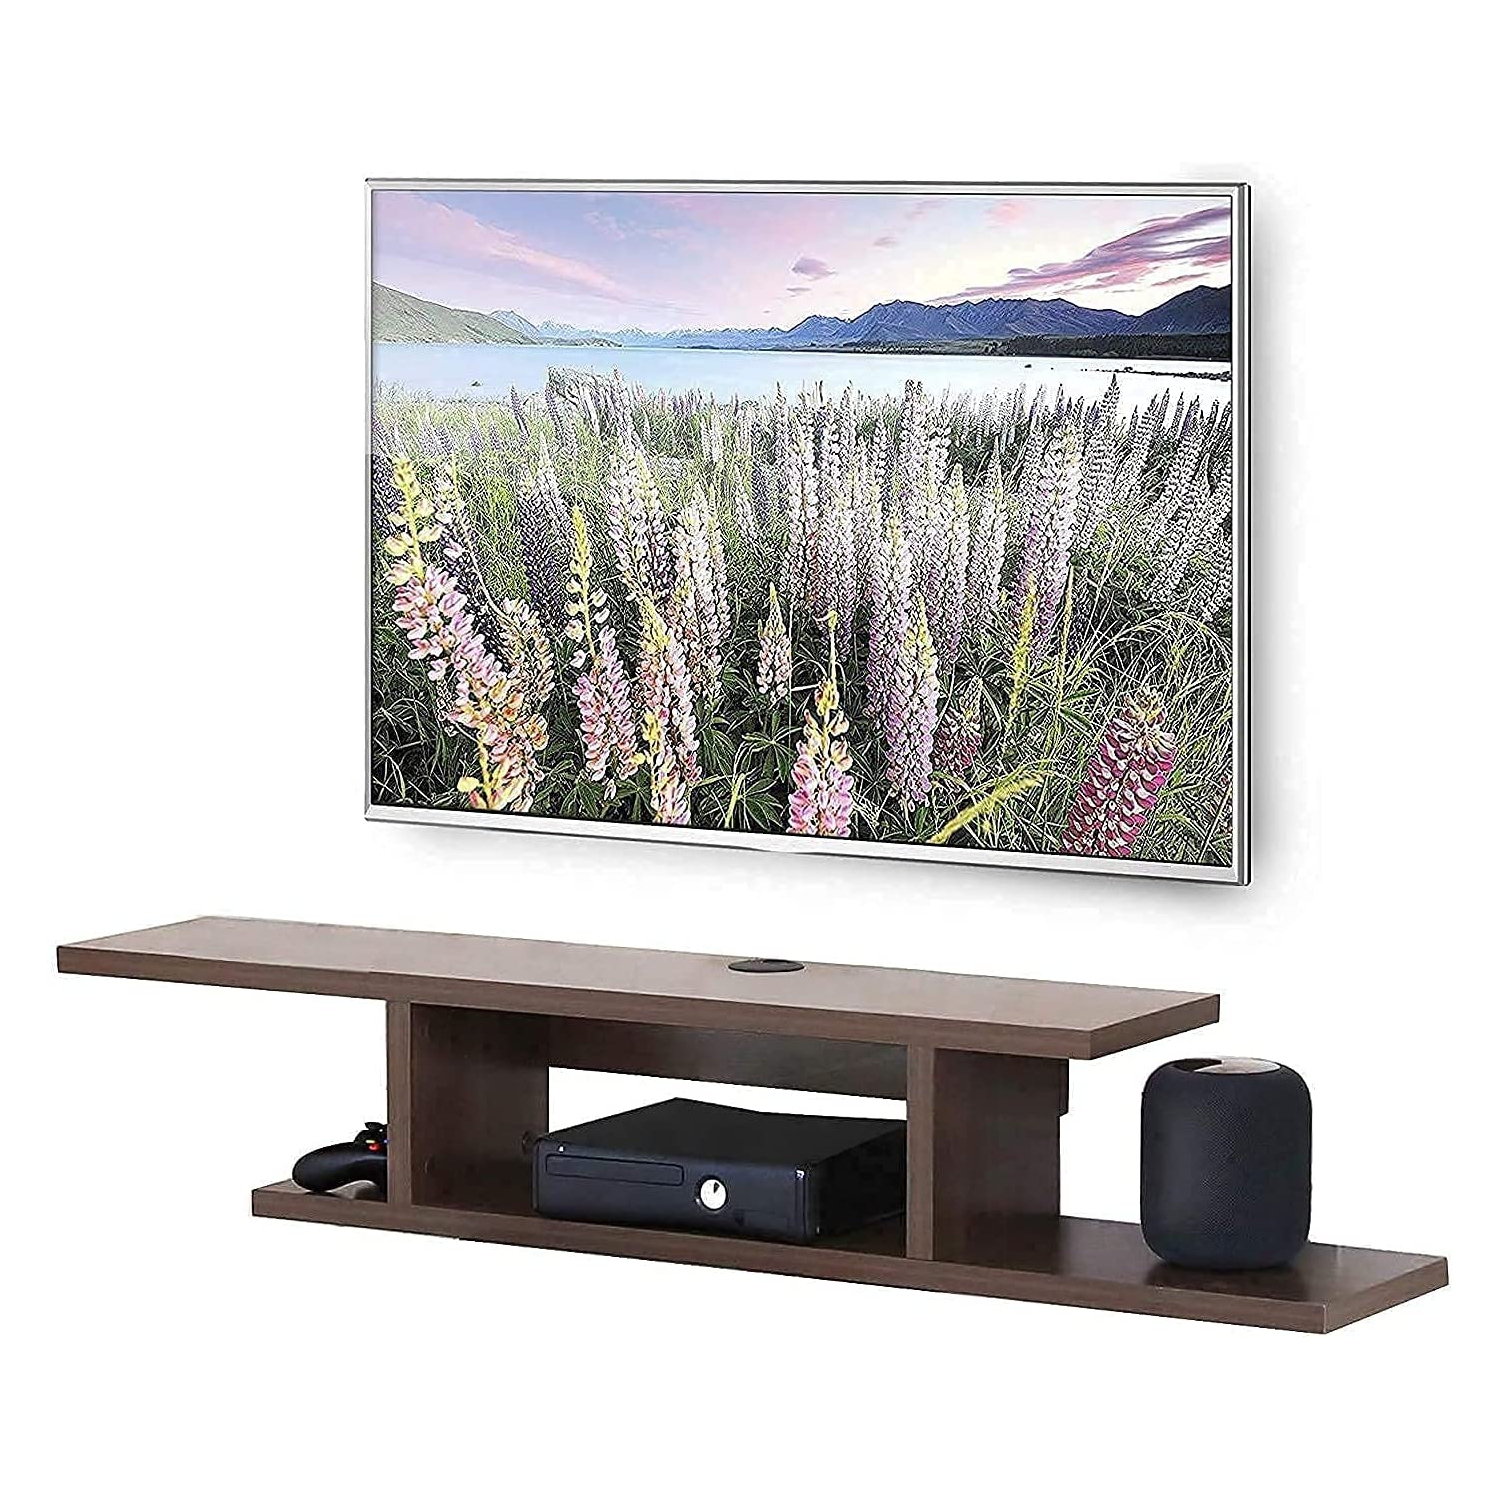 Fitueyes Floating tv Shelf,Wall Mounted Tv Stand Entertainment Center for Xbox one/PS4/vizio/Sumsung/sony